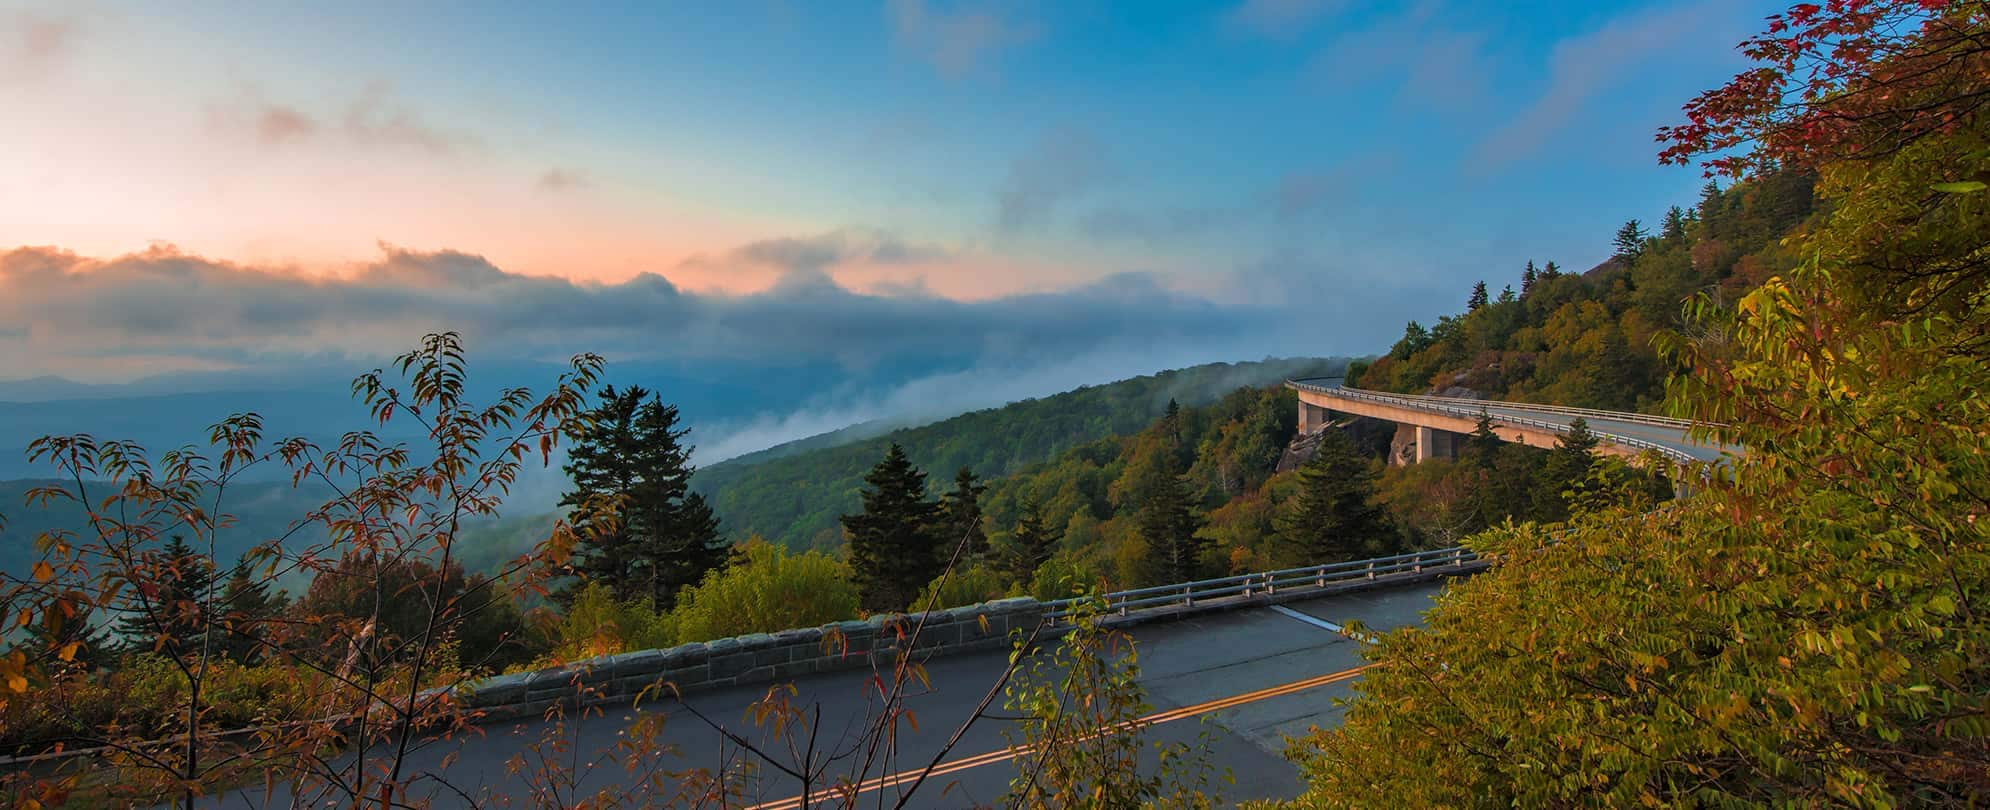 A scenic road winding through the Blue Ridge Mountains in North Carolina